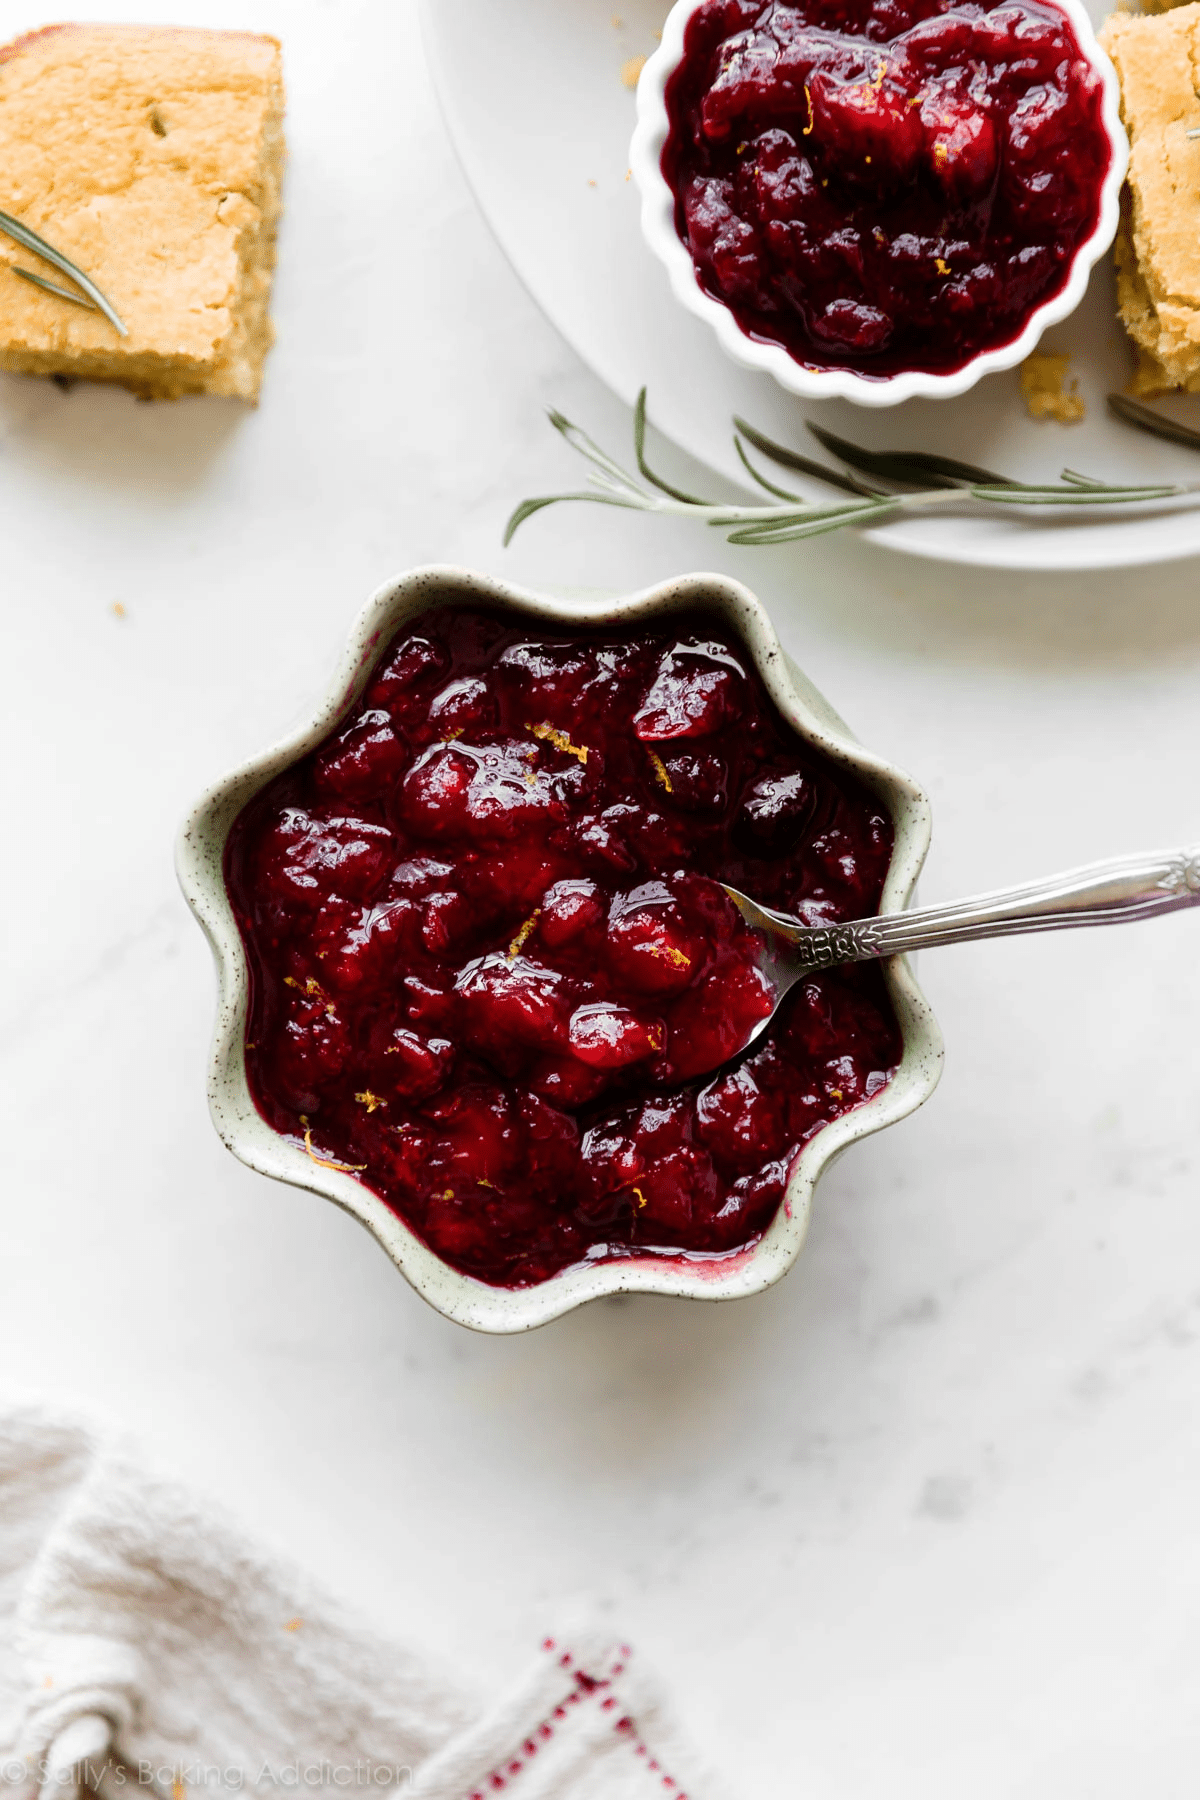 Cranberry sauce in a star ramekin on a table with another small portion of cranberry sauce on the side. 